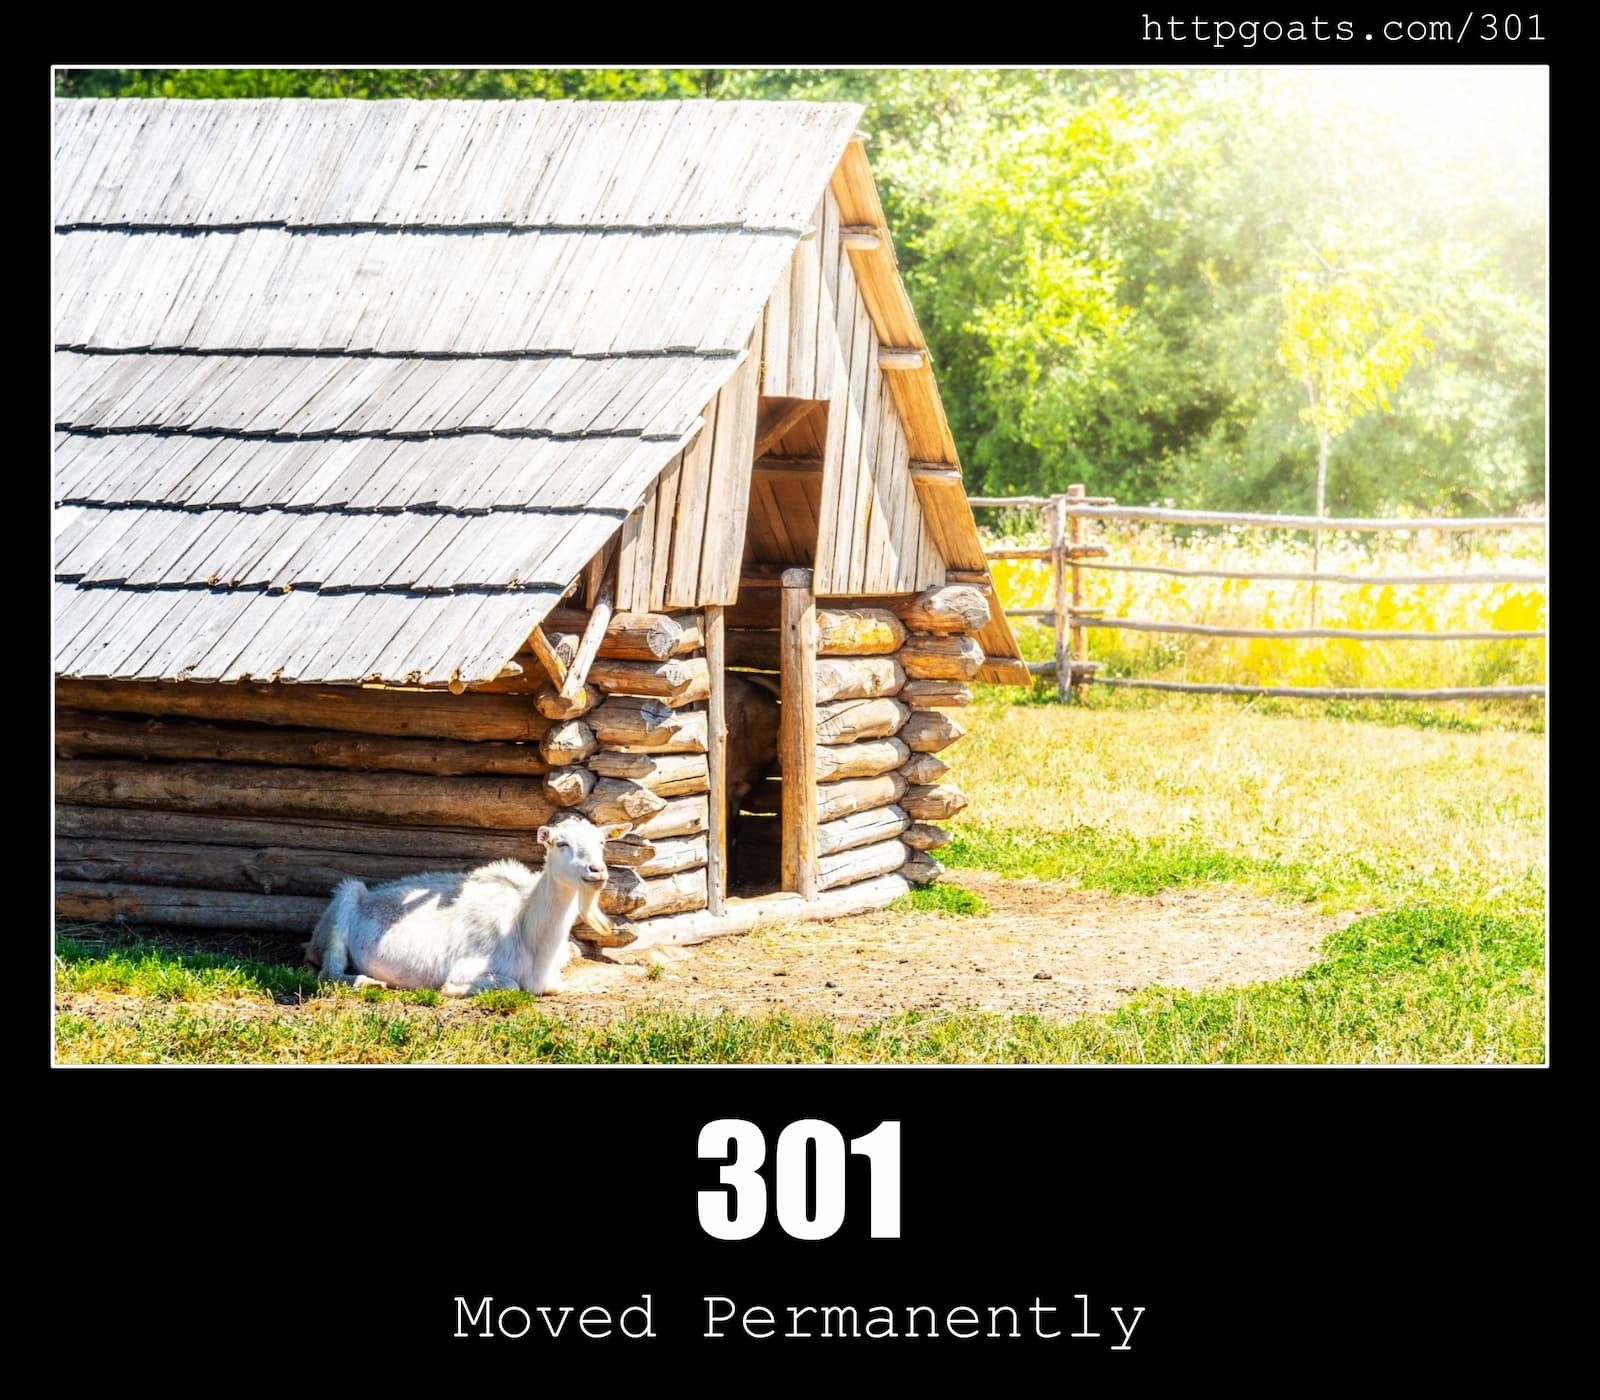 HTTP Status Code 301 Moved Permanently & Goats